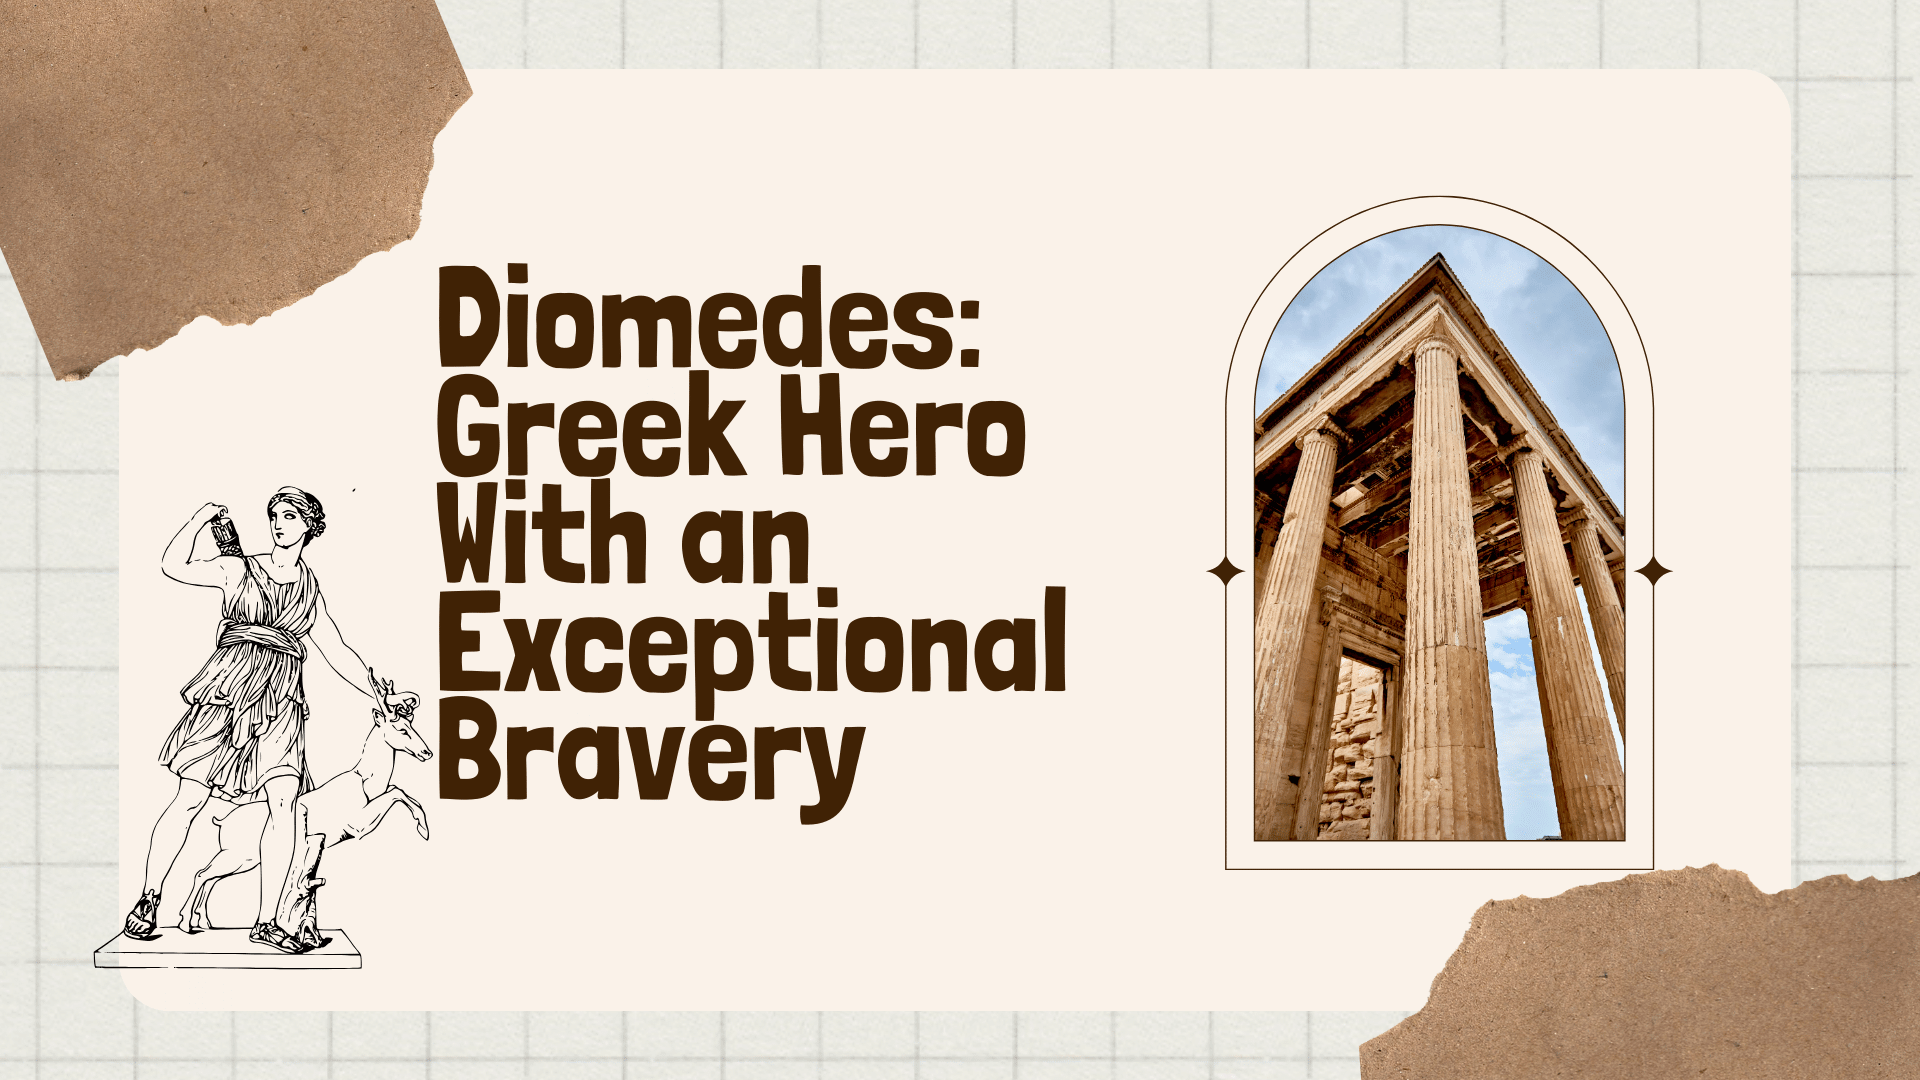 Diomedes: Greek Hero With an Exceptional Bravery